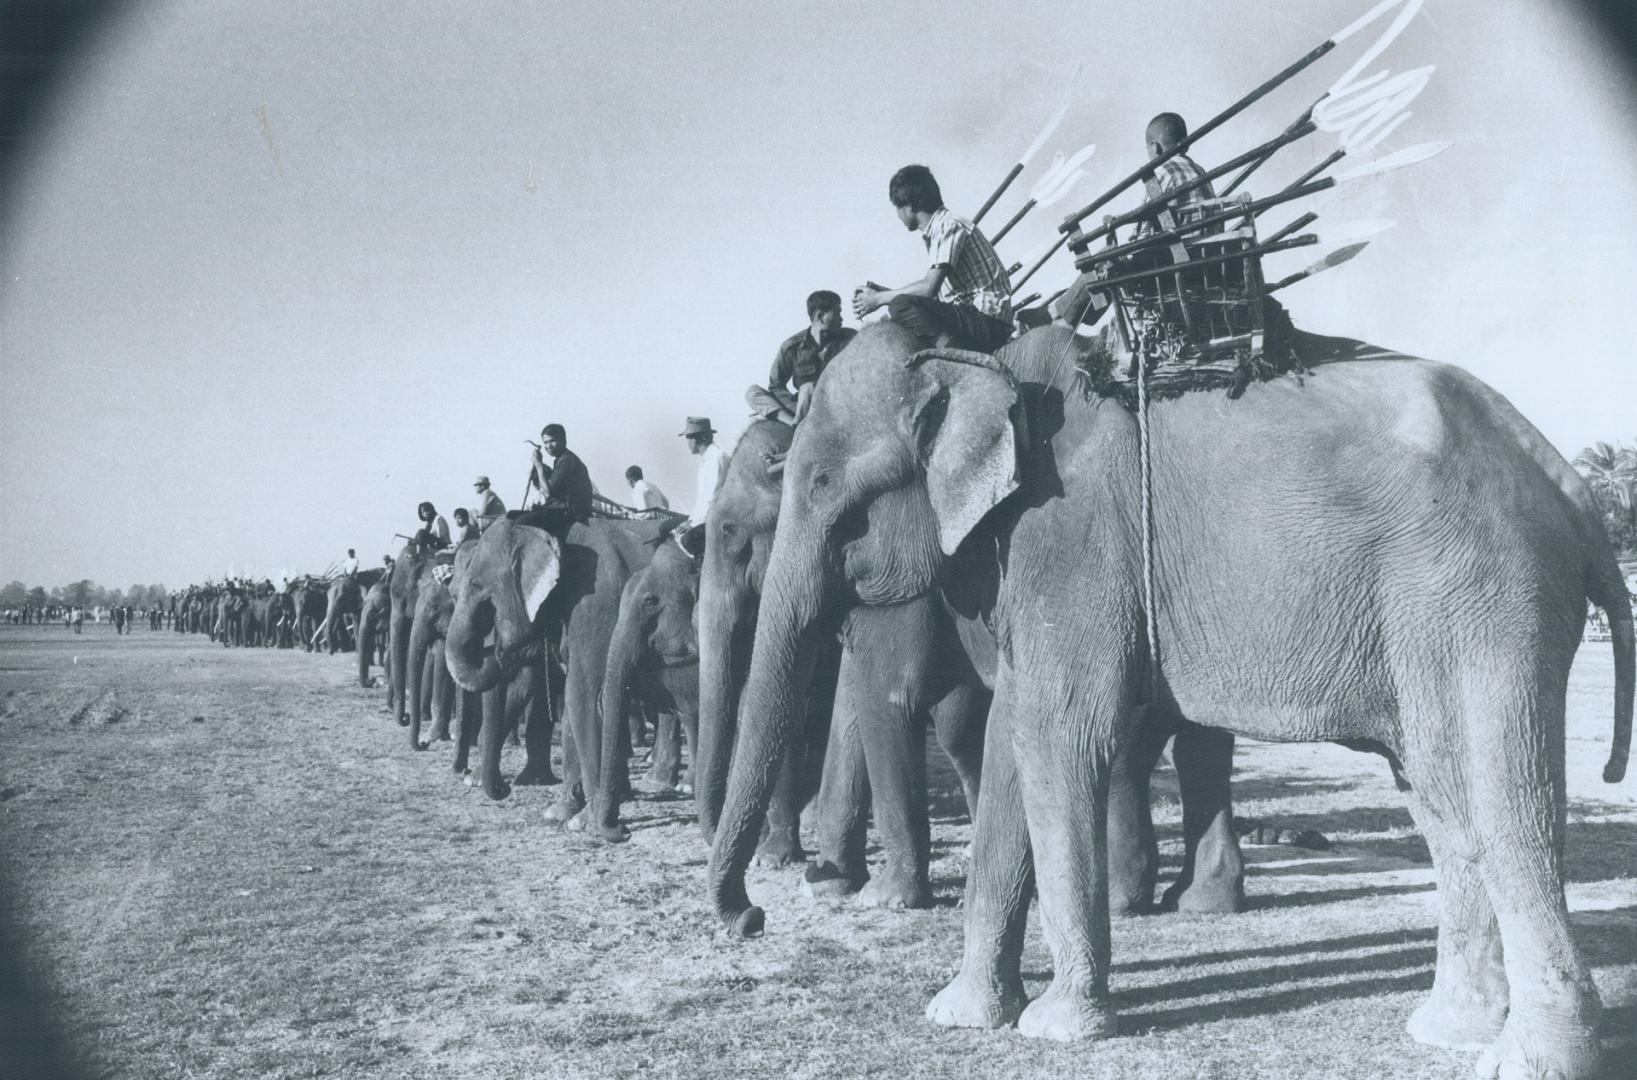 Elephants at Surin line up for mock warfare in which they carry spearmen